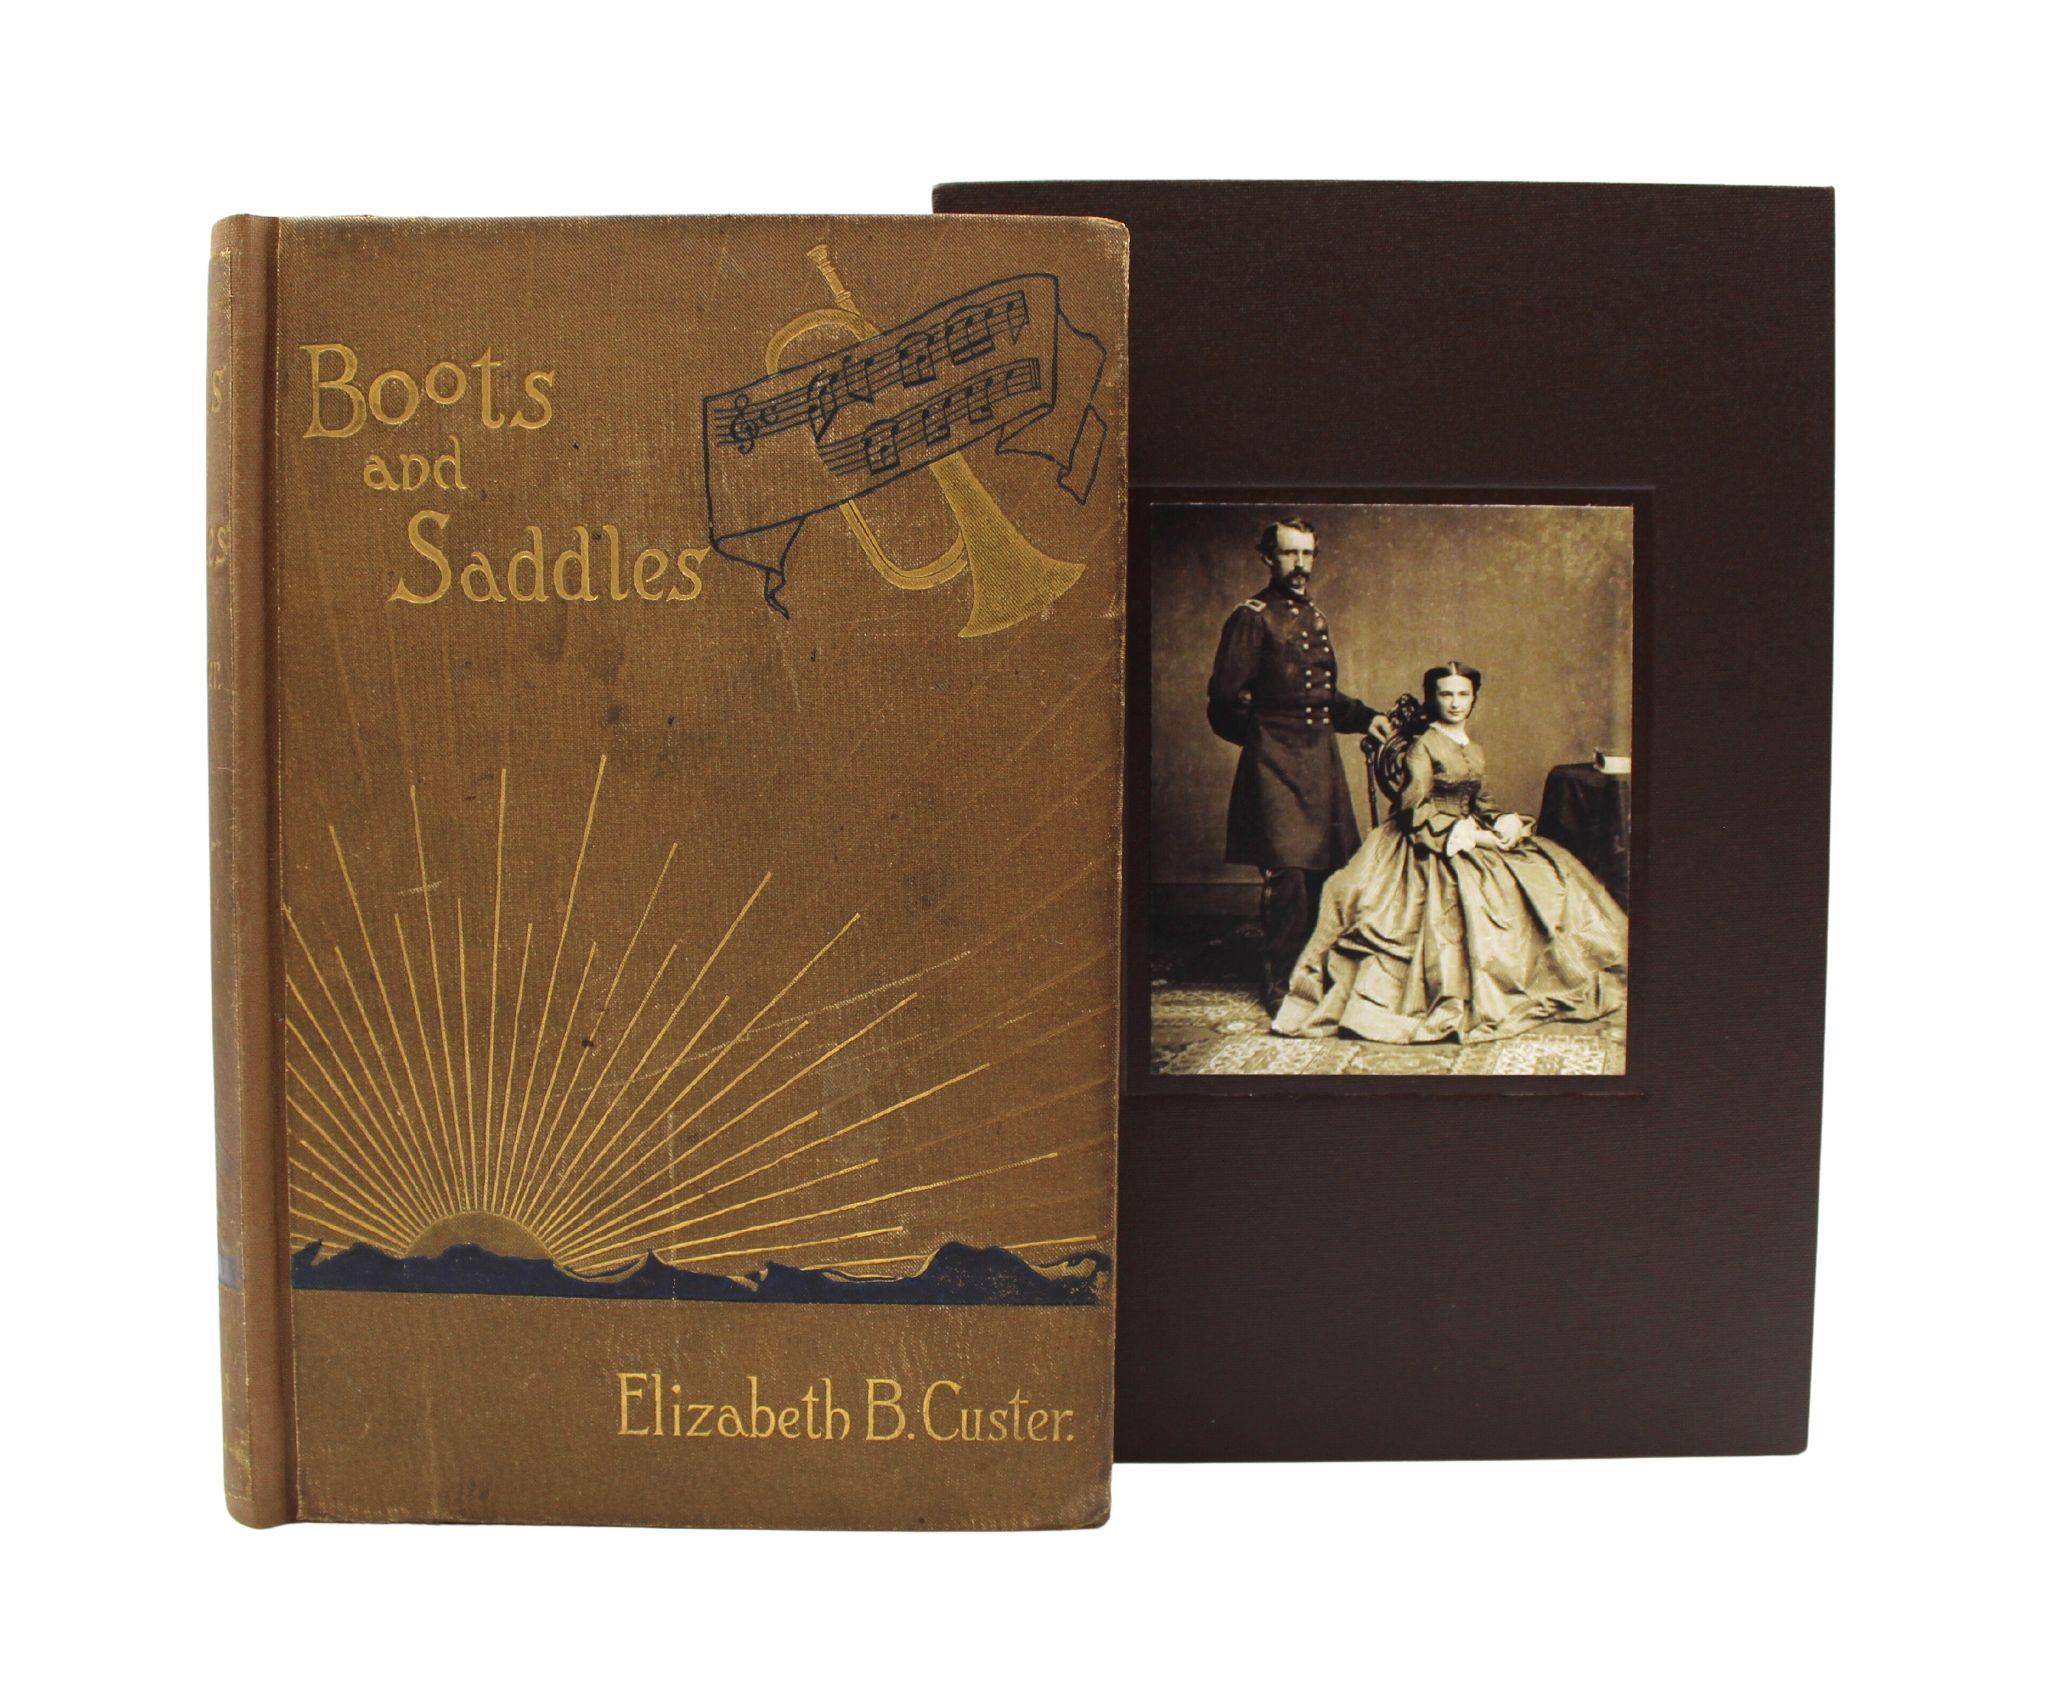 Custer, Elizabeth B. Boots and Saddles, Or Life in Dakota with General Custer. New York: Harper & Brothers, 1885. First edition. Octavo. Embossed brown cloth front boards with gilt and black titles to spine, reback in brown cloth to match. With a